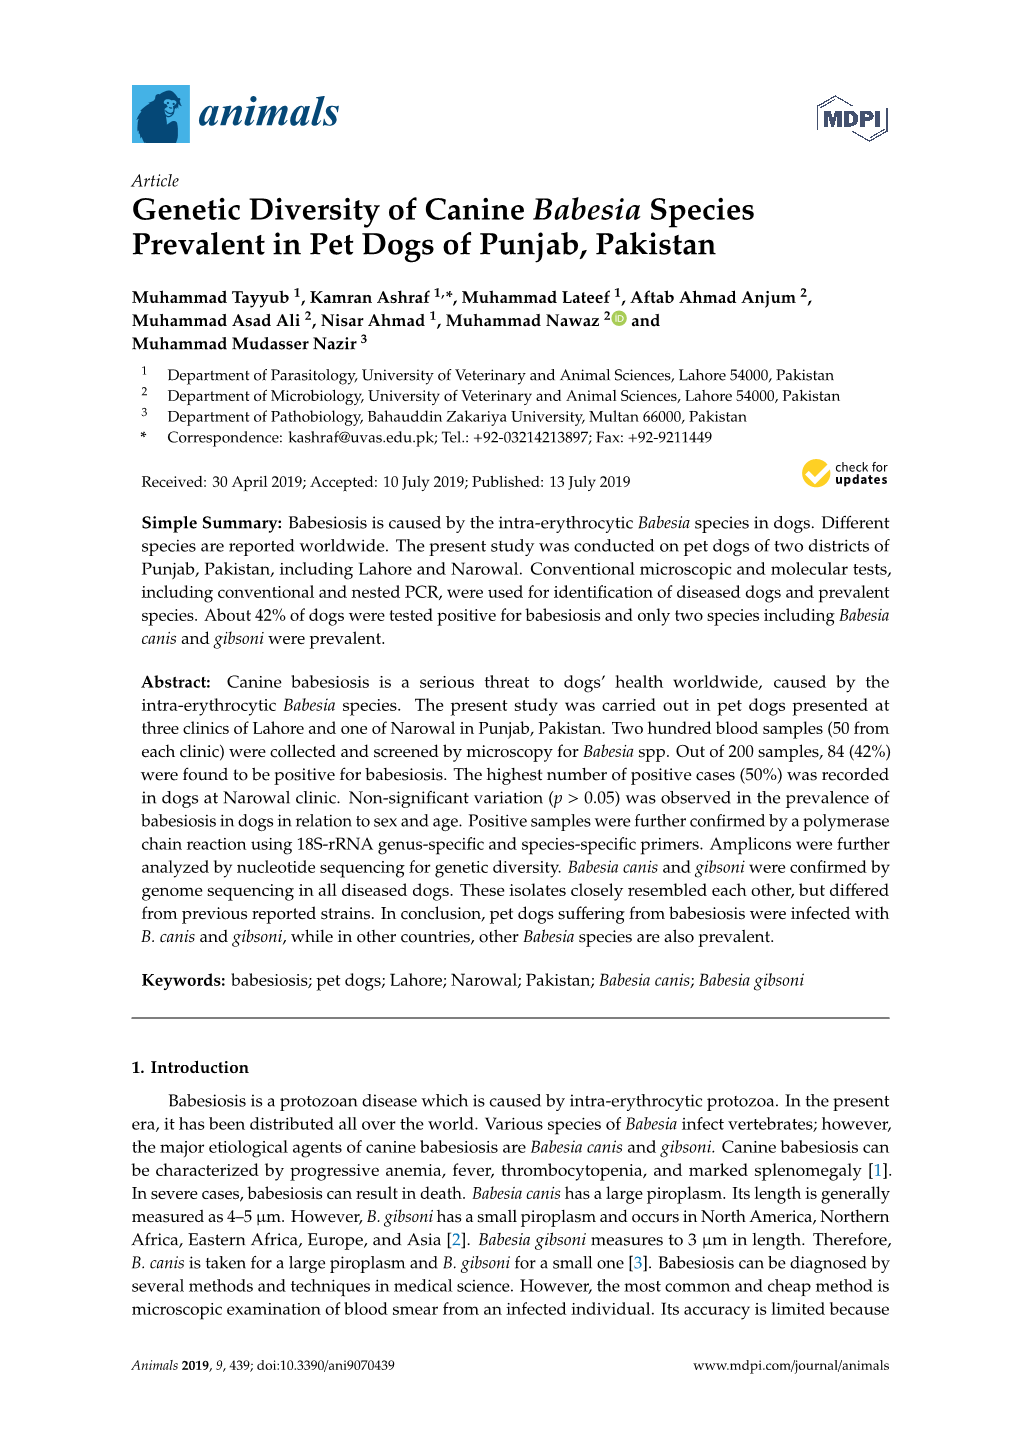 Genetic Diversity of Canine Babesia Species Prevalent in Pet Dogs of Punjab, Pakistan